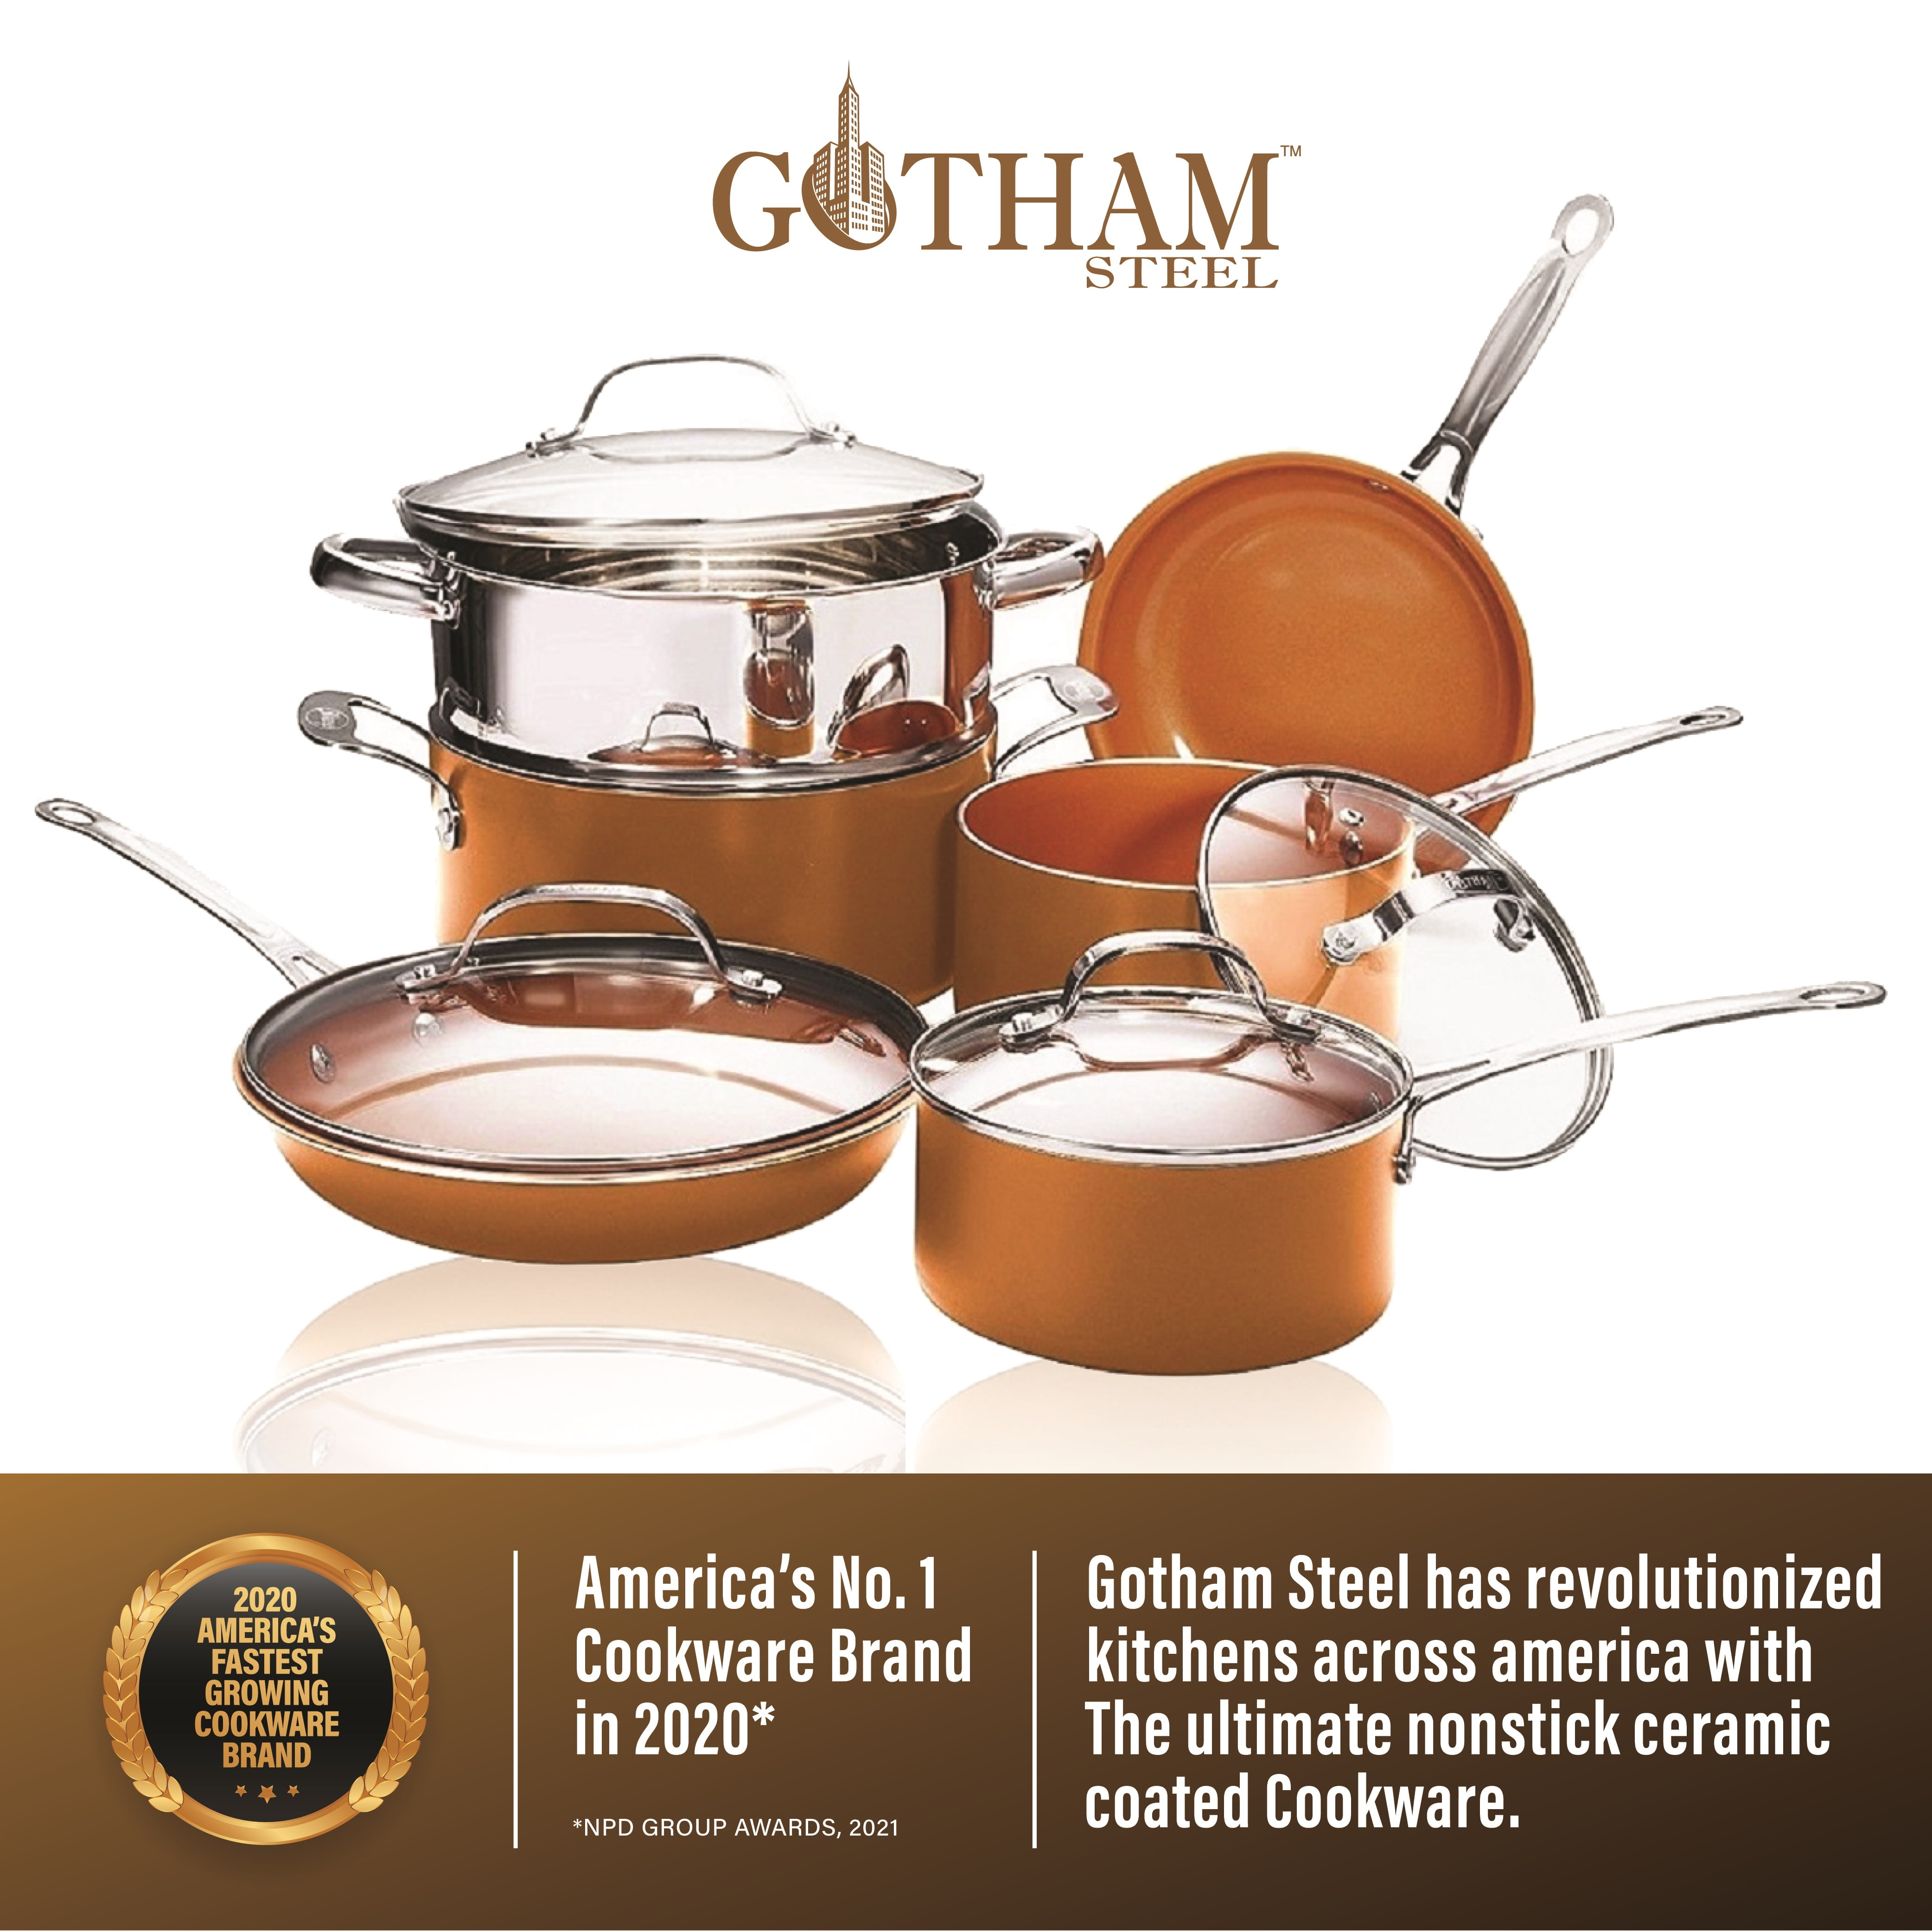 Gotham Steel Hammered 15 Pc Pots and Pans Set Nonstick, Ceramic Cookware +  Bakeware Set, Pans for Cooking Non Toxic, Induction Cookware Set for